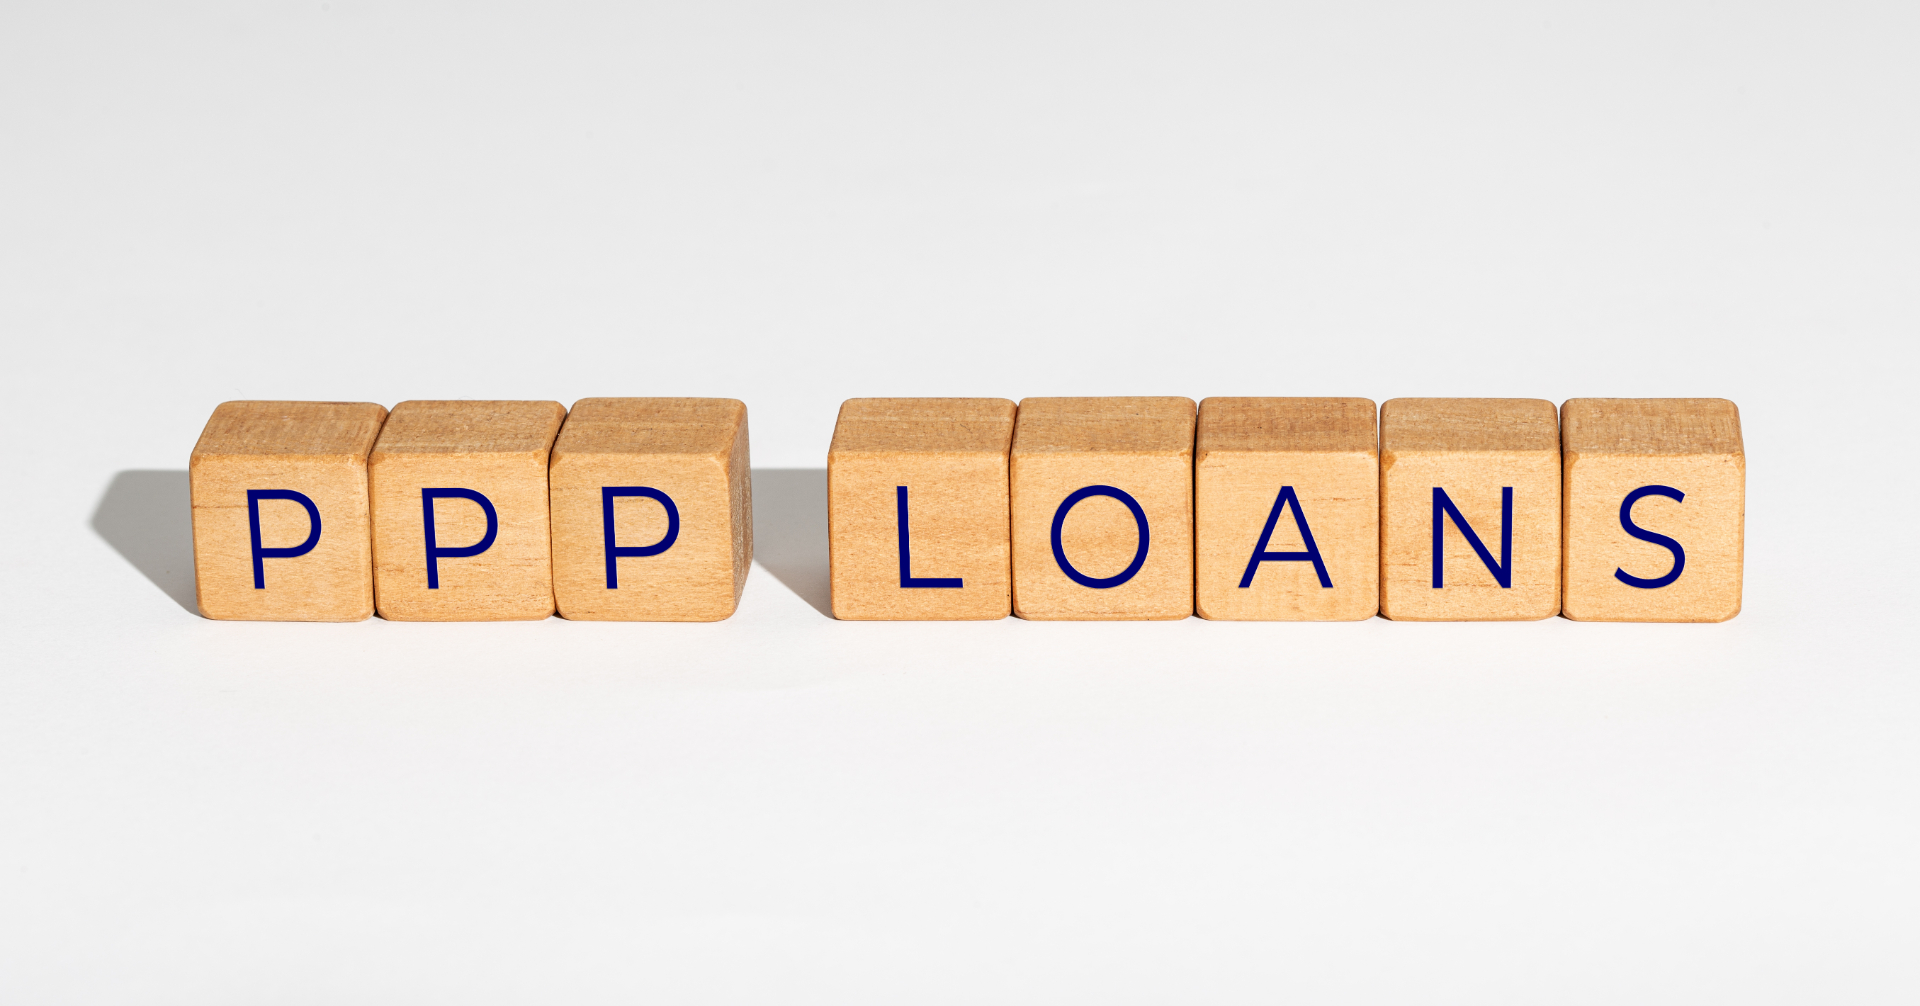 Need another PPP loan for your small business? Seiler, Singleton and